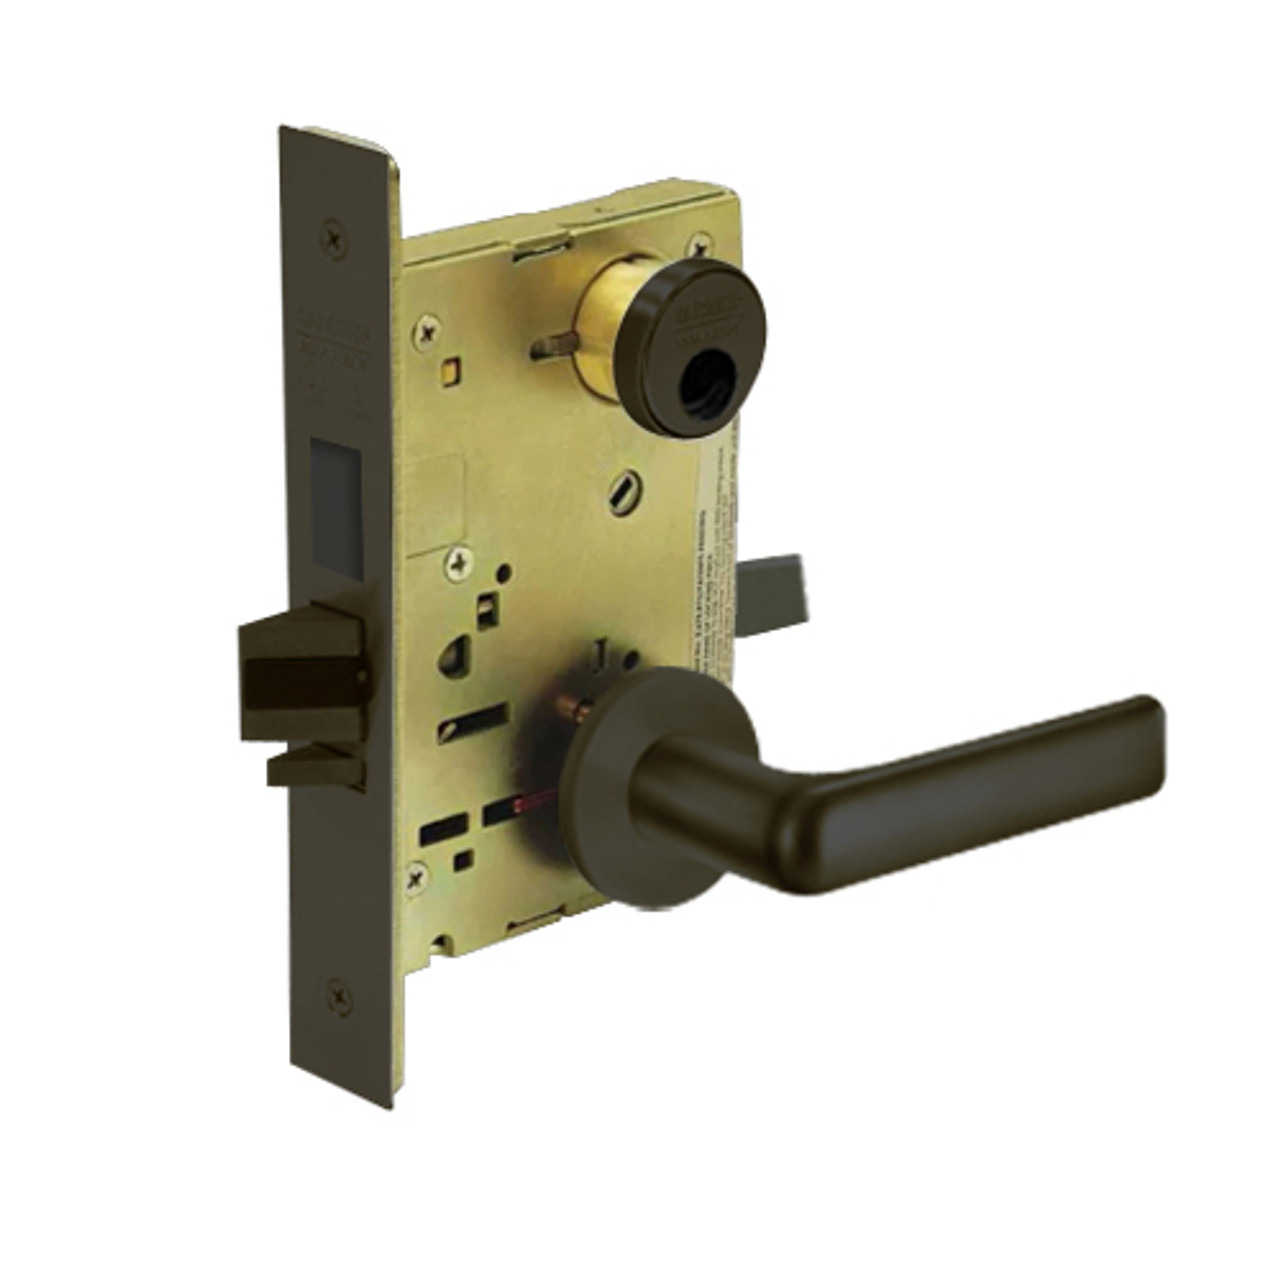 LC-8243-LNE-10B Sargent 8200 Series Apartment Corridor Mortise Lock with LNE Lever Trim and Deadbolt Less Cylinder in Oxidized Dull Bronze